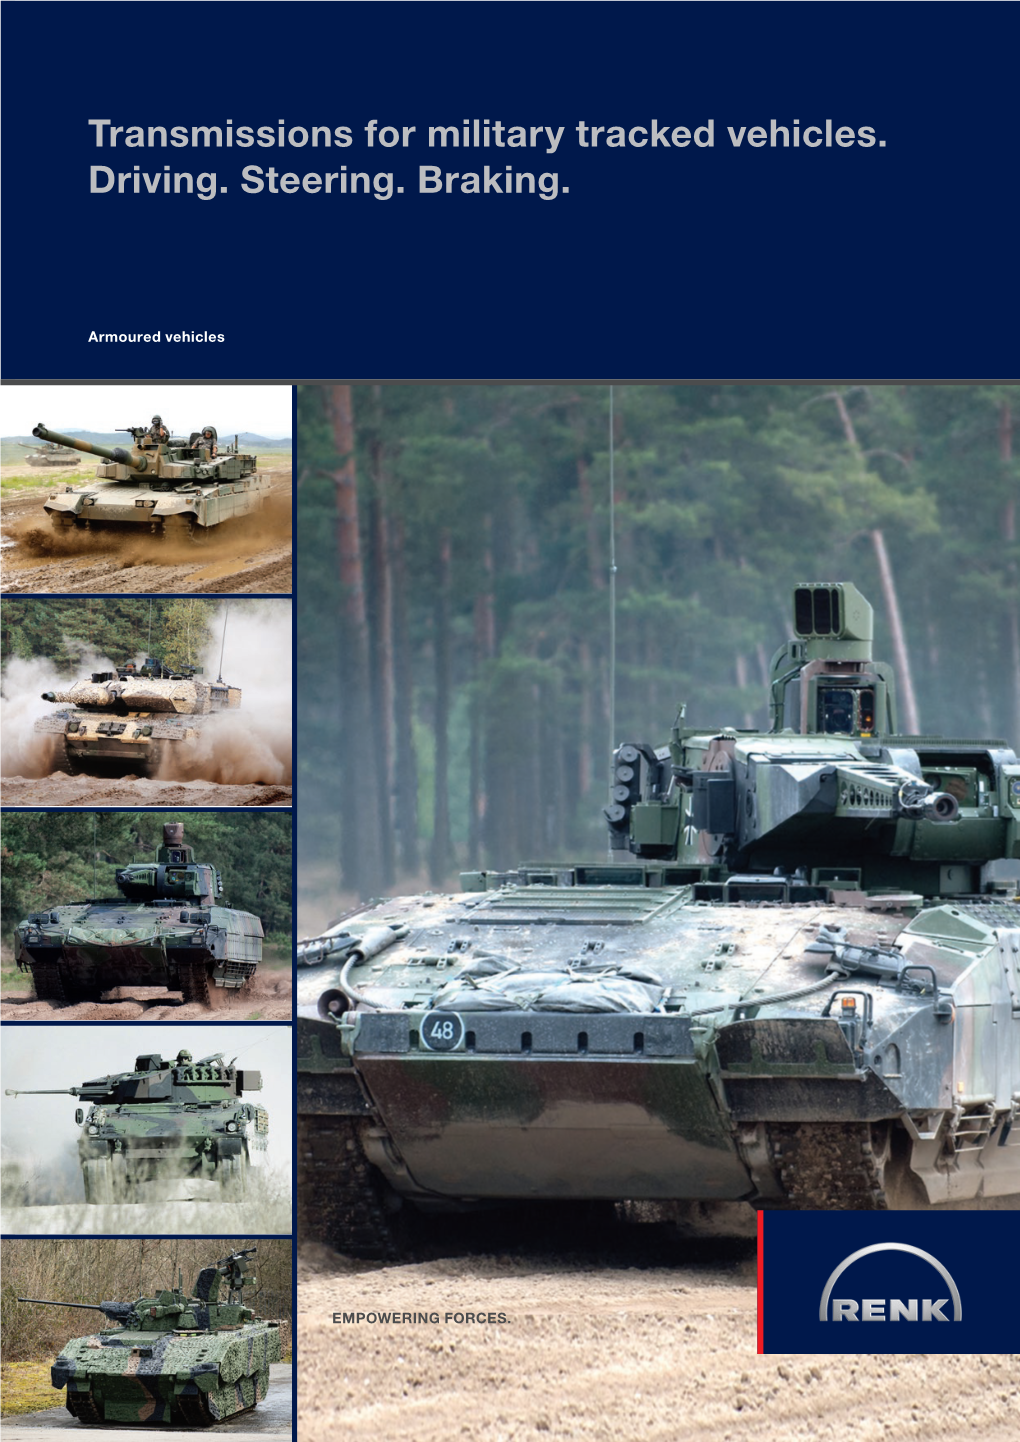 Transmissions for Military Tracked Vehicles. Driving. Steering. Braking